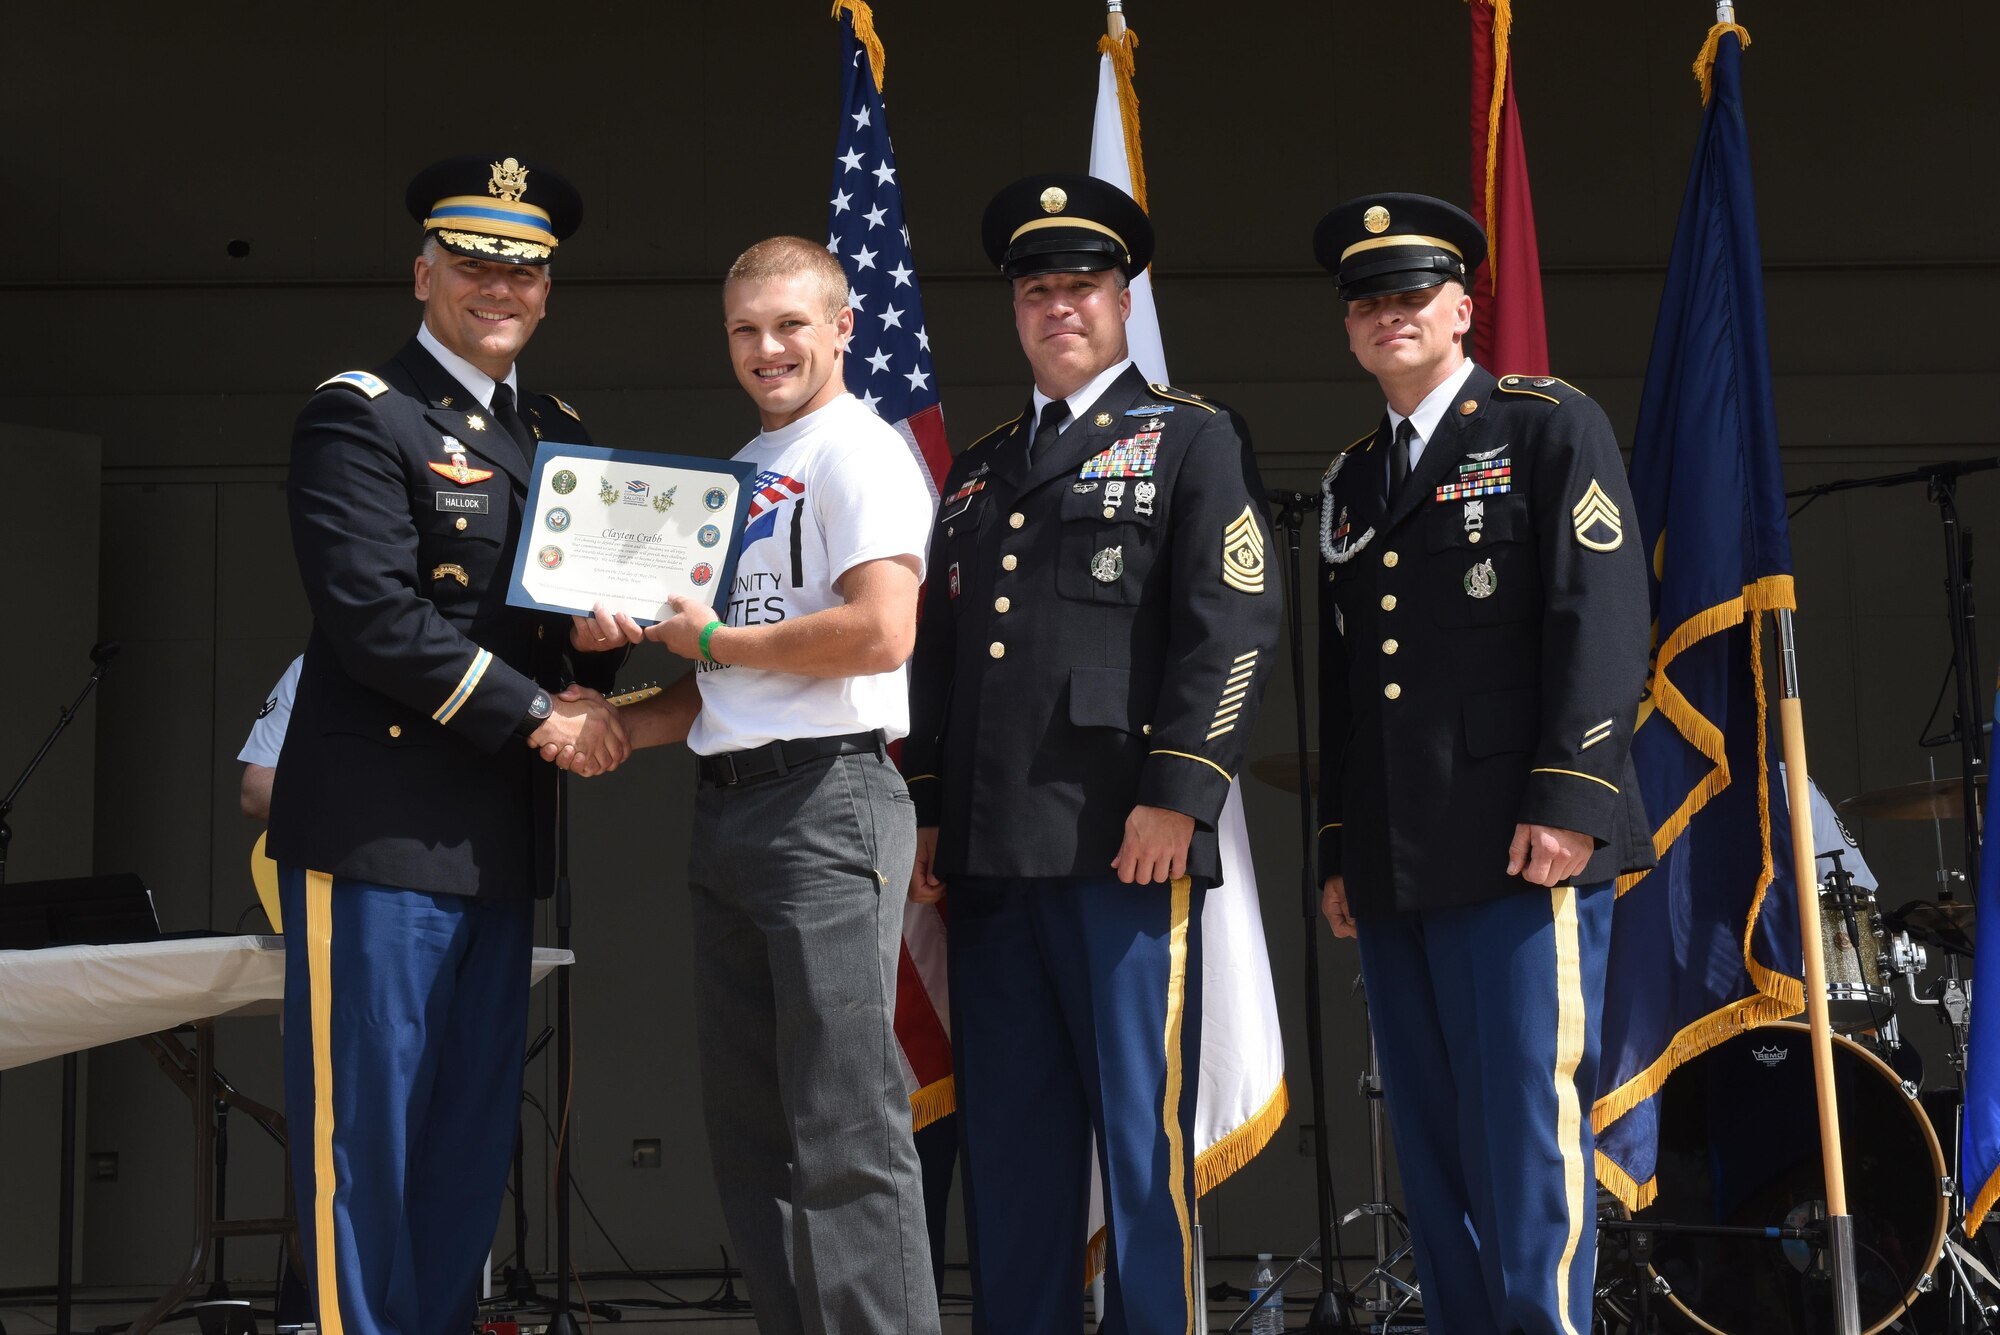 U.S. Army Lt. Col. Jason Hallock, 344th Military Intelligence Battalion Commander, presents a certificate to Clayten Crabb, high school student, for choosing to enlist in the Army, at the RiverStage in San Angelo, Texas, May 21, 2016. (U.S. Air Force photo by Airman 1st Class Chase Sousa/Released)